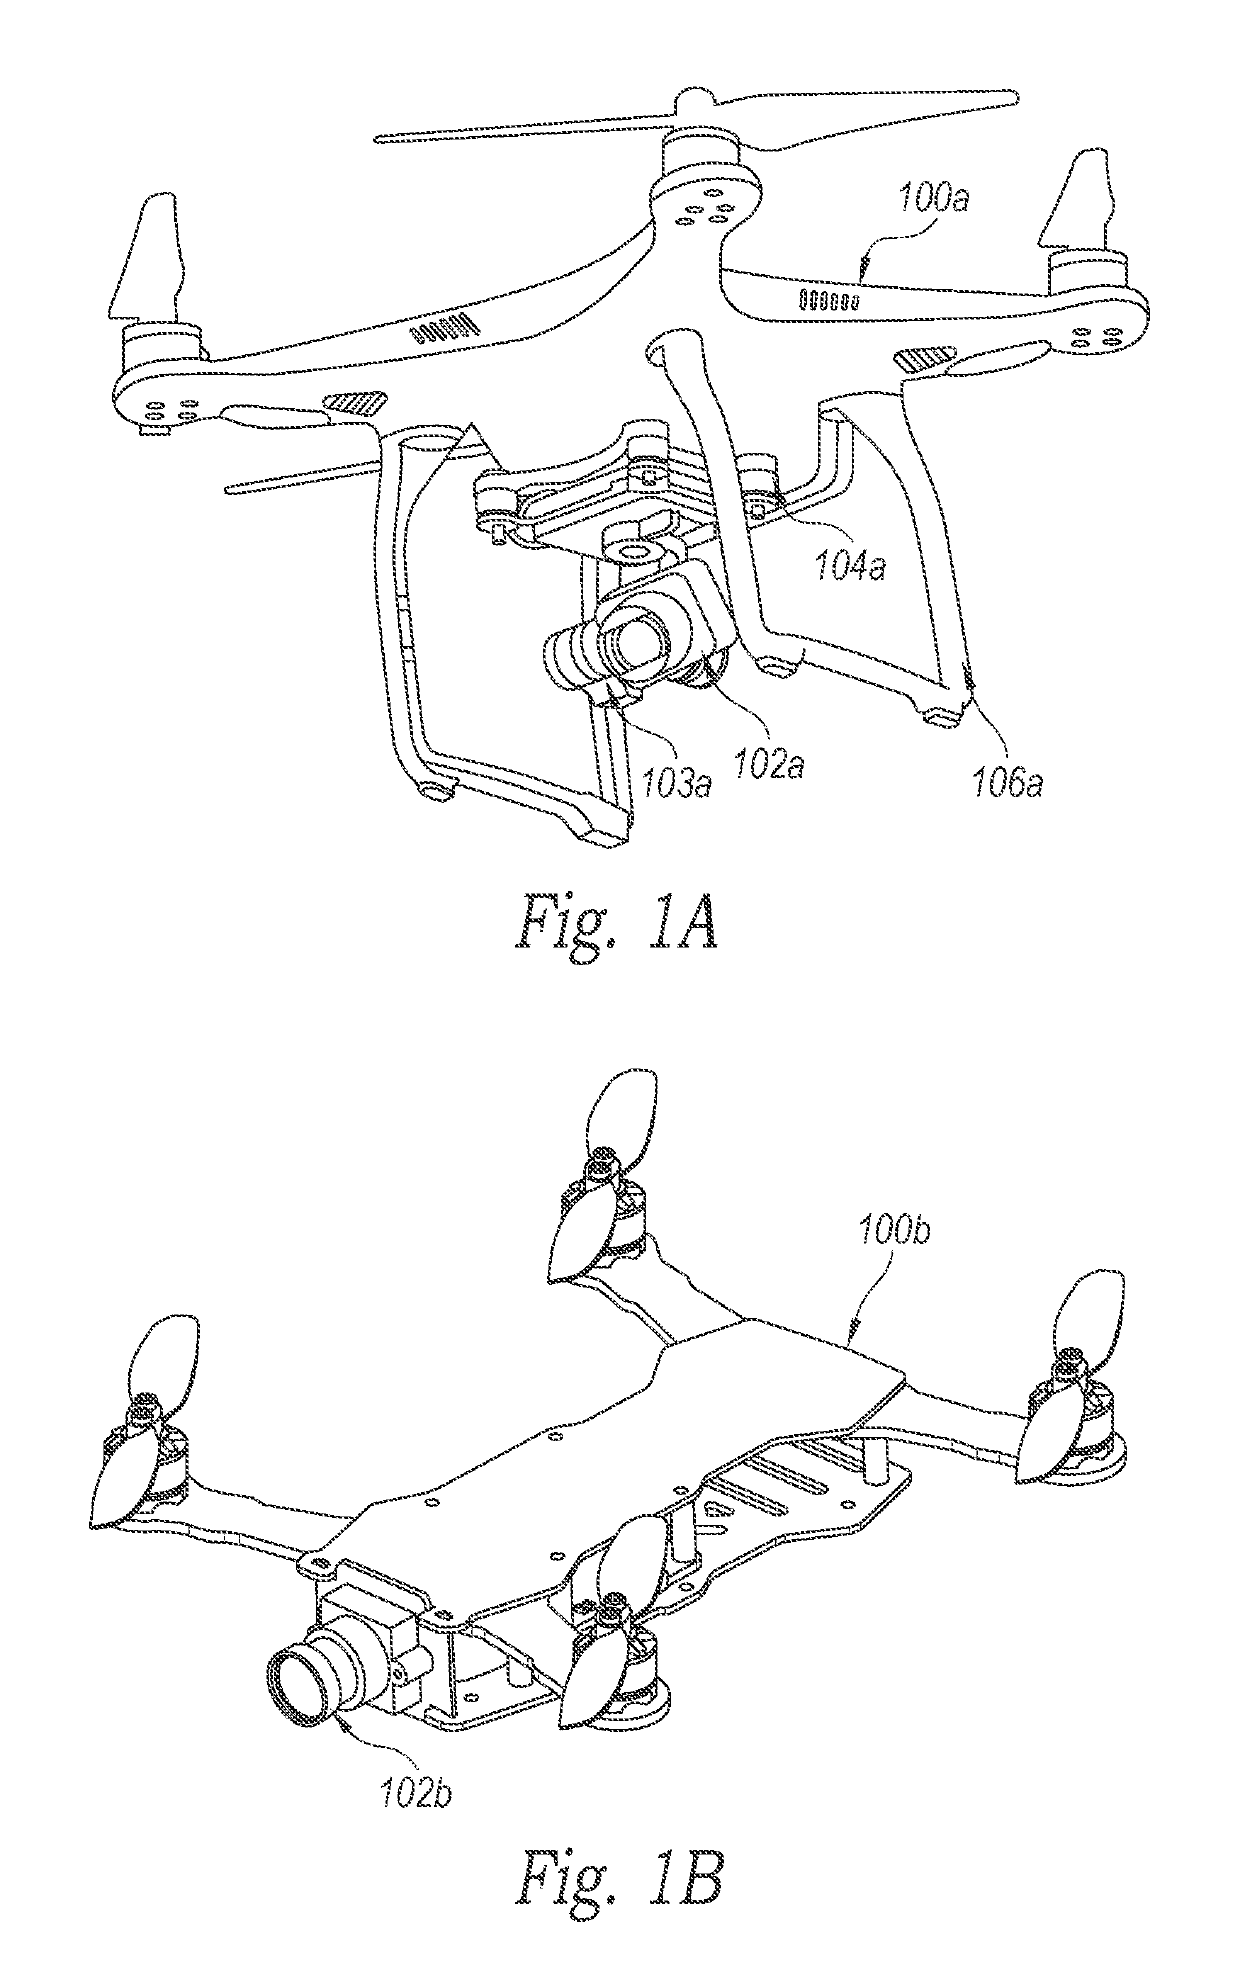 Counter-balanced suspended image stabilization system